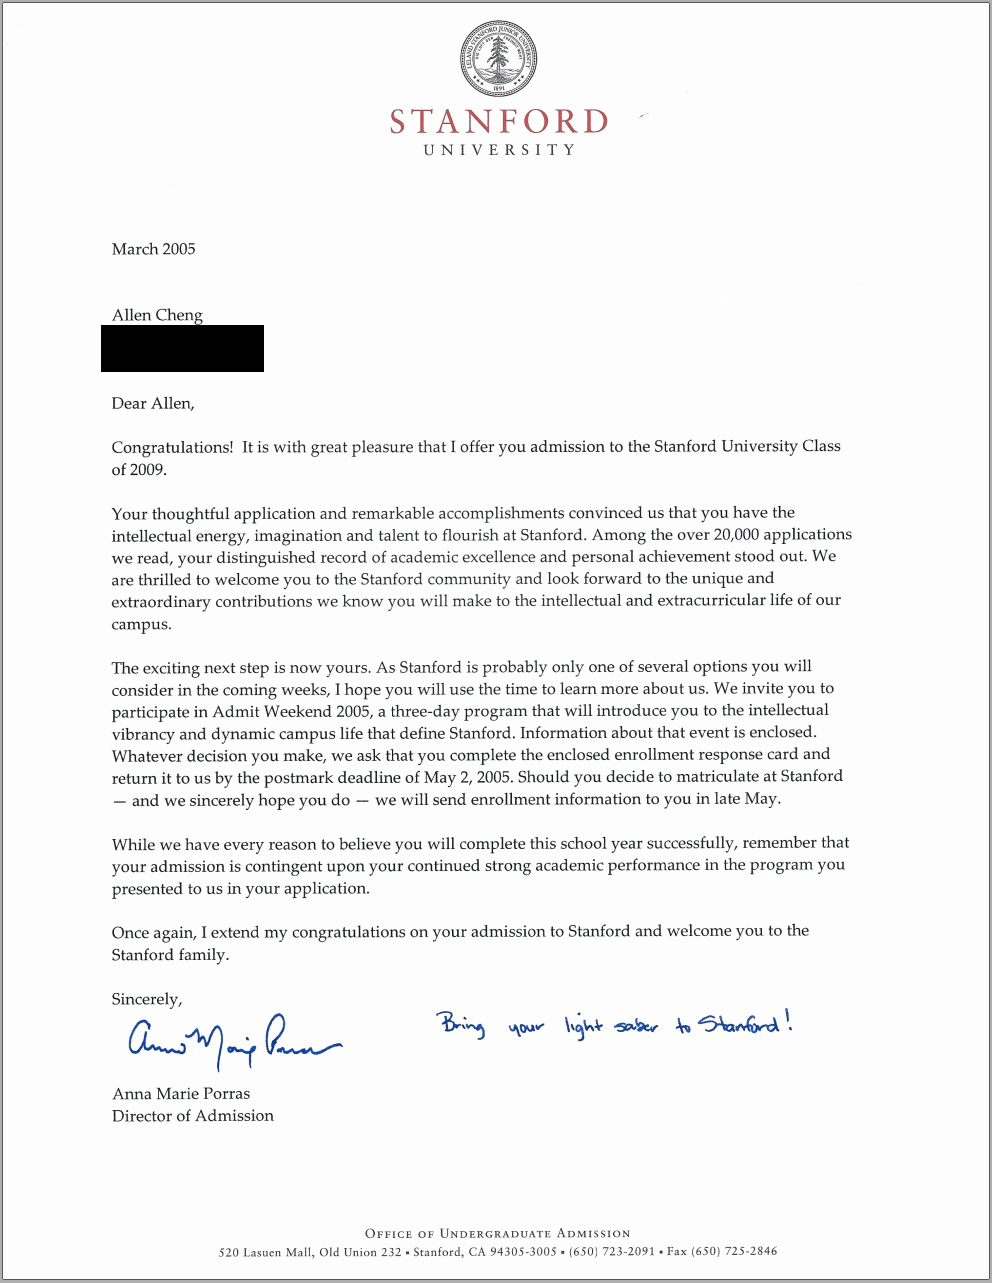 College Acceptance Letter Sample Awesome Stanford Acceptance Letter Real and Ficial